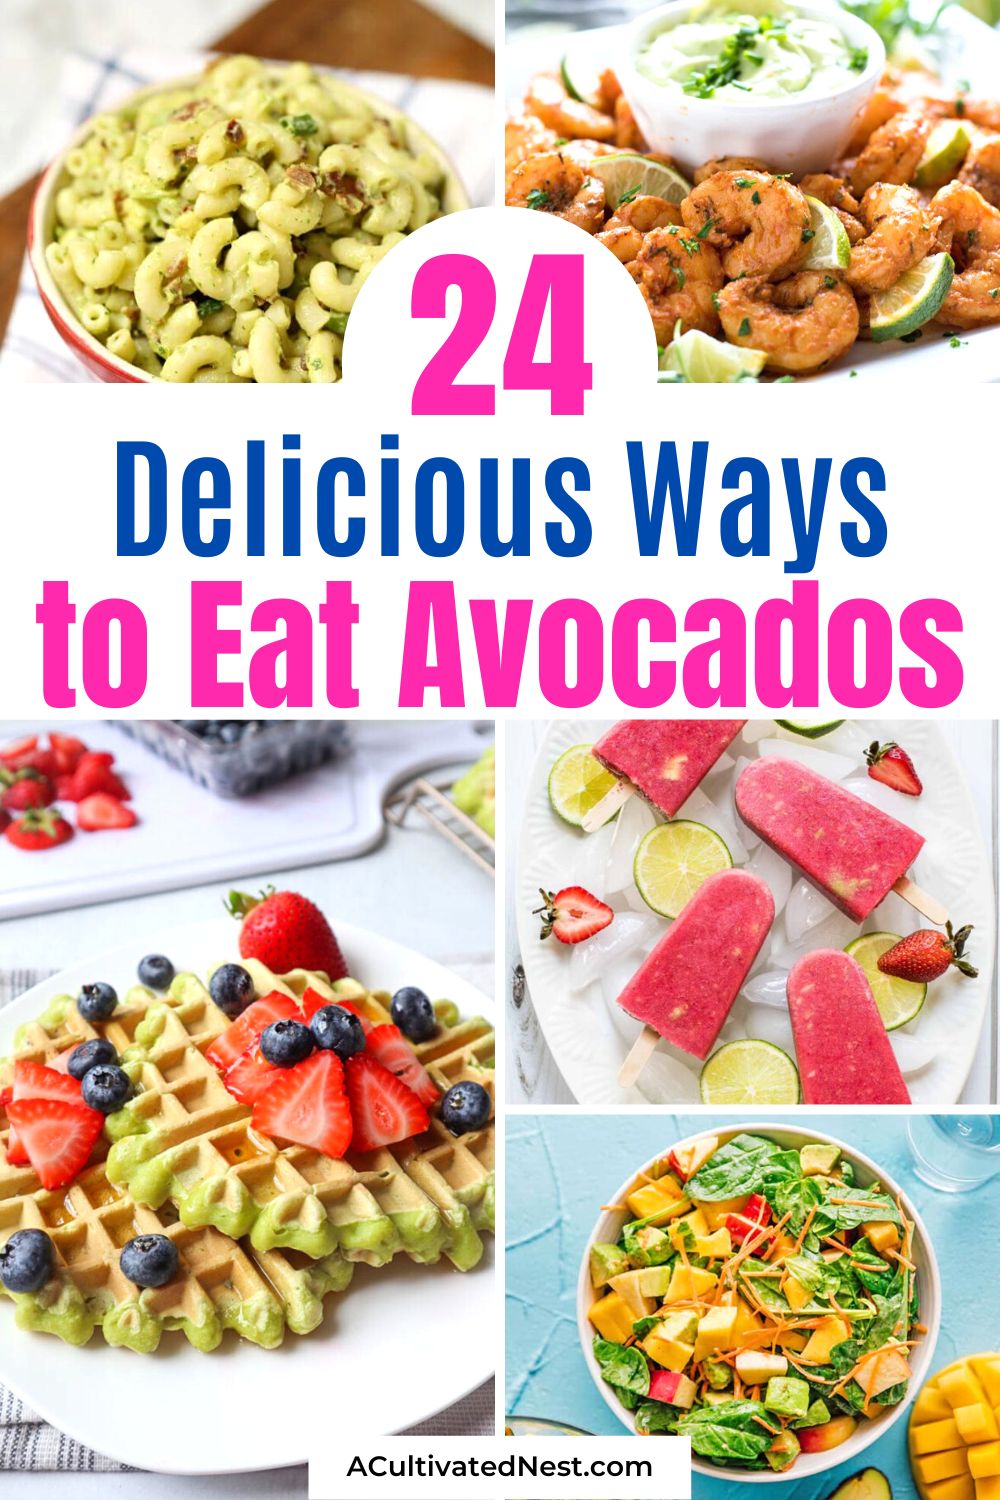 24 Delicious Ways to Use Avocados in Recipes- Discover a world of culinary creativity with these delicious ways to use avocados in recipes! From snacks and desserts to entrees and smoothies, these avocado-based dishes are a must-try for any avocado lover! | #avocados #recipes #healthyEating #avocadoRecipes #ACultivatedNest